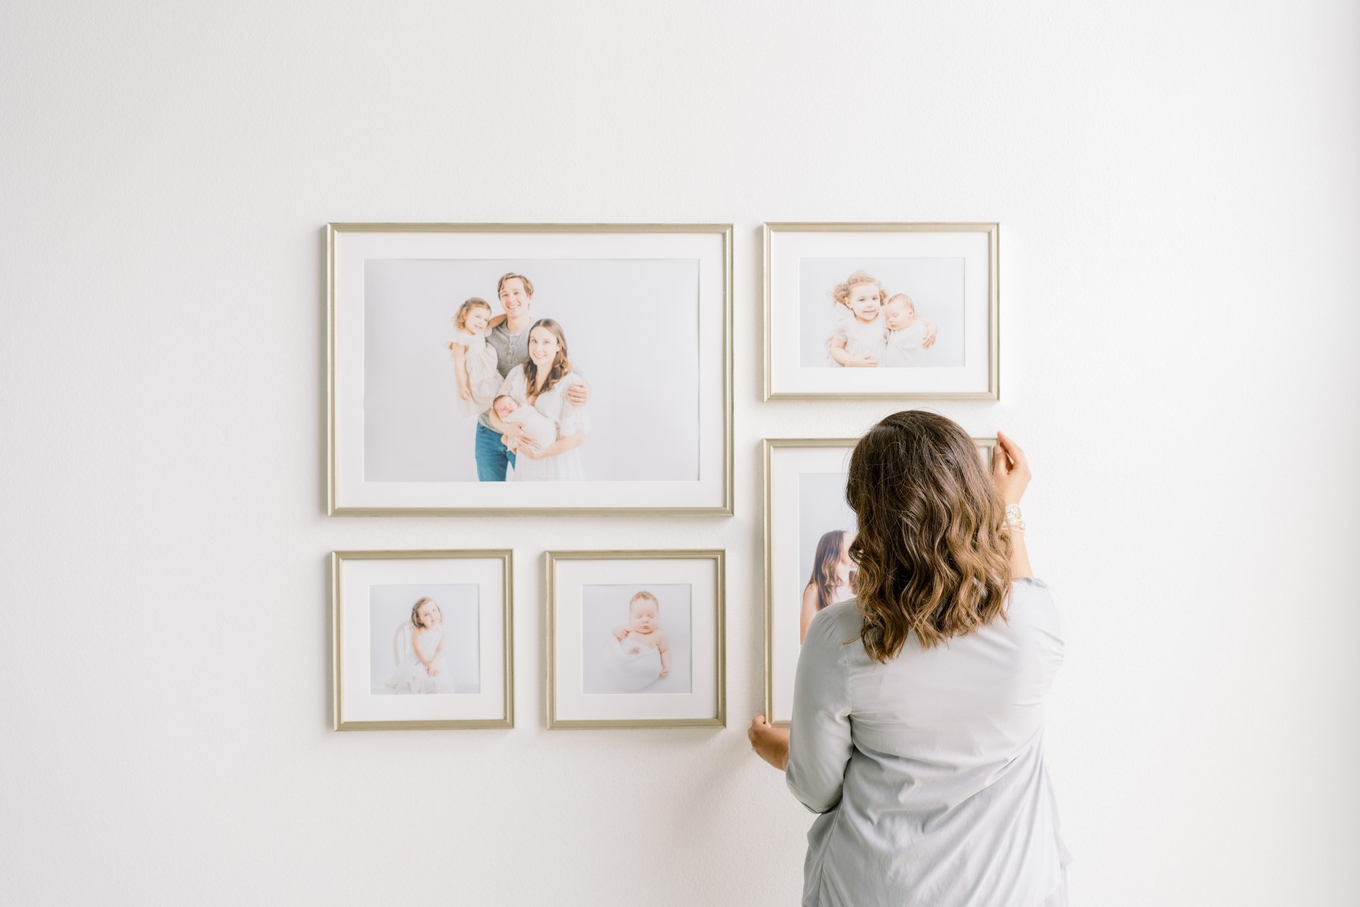 Maternity and newborn portraits in a custom wall art design by Sana Ahmed Photography.